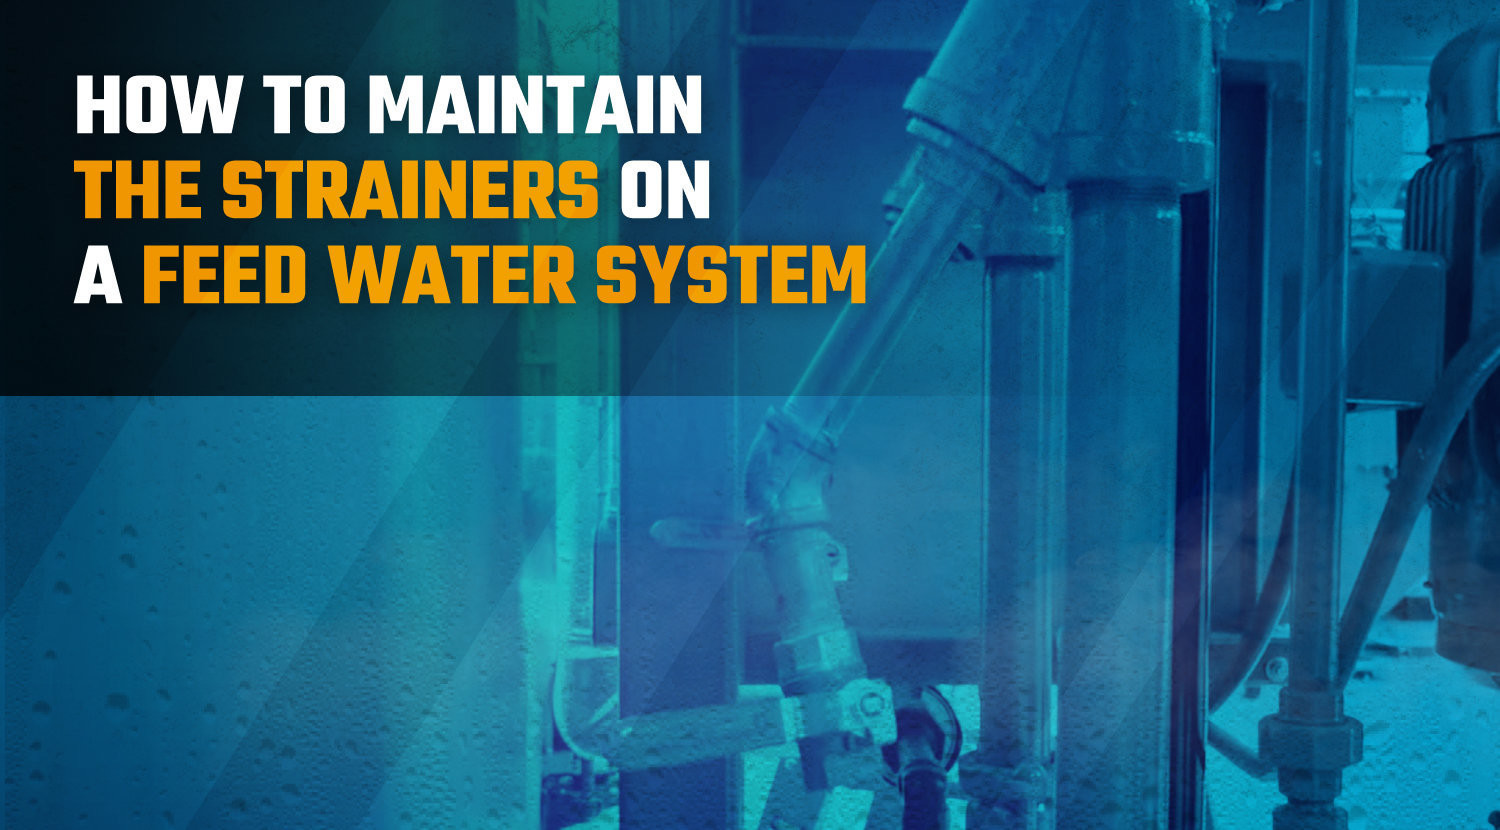 How to Maintain the Strainers on a Feed Water System